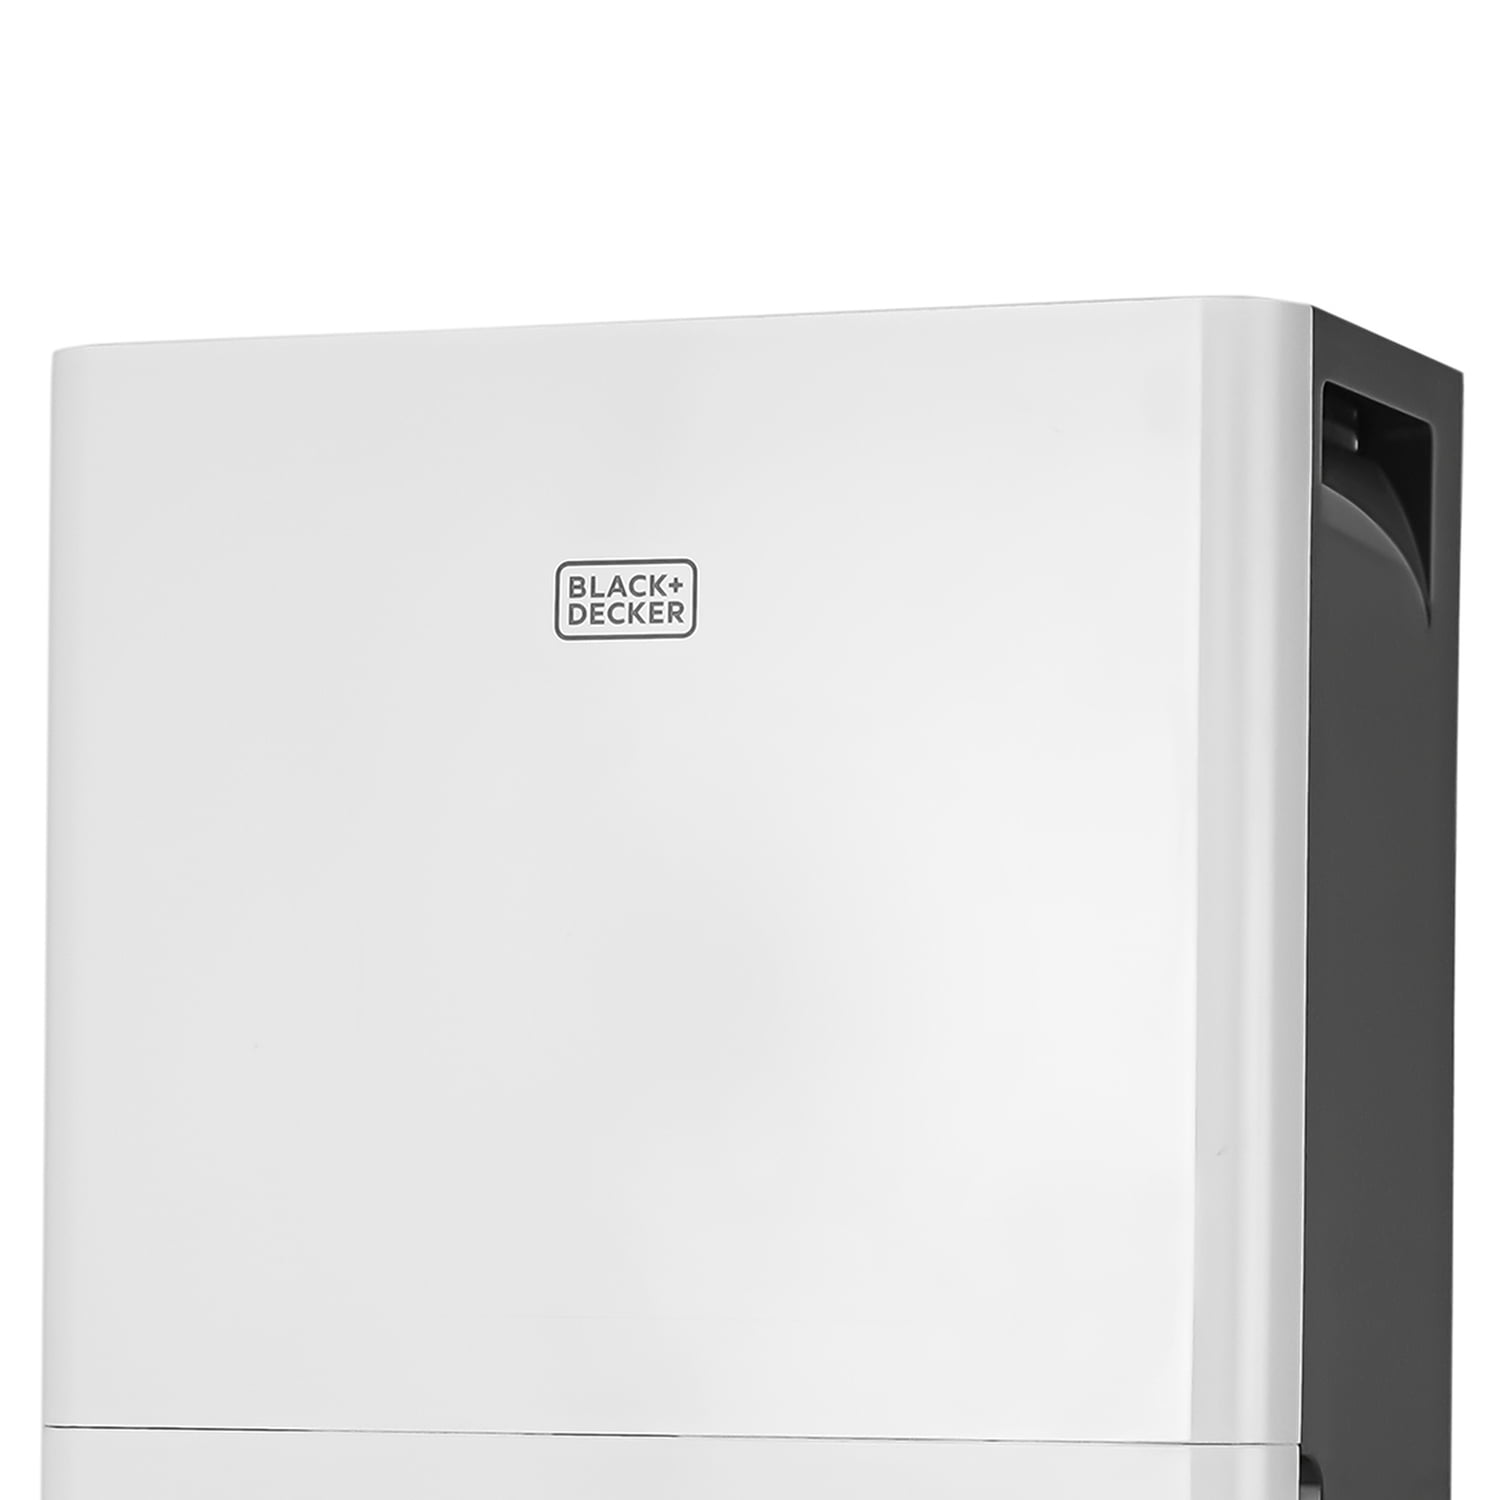 BLACK+DECKER 4500 Sq Ft Dehumidifier for Extra Large Spaces and Basements  Review 